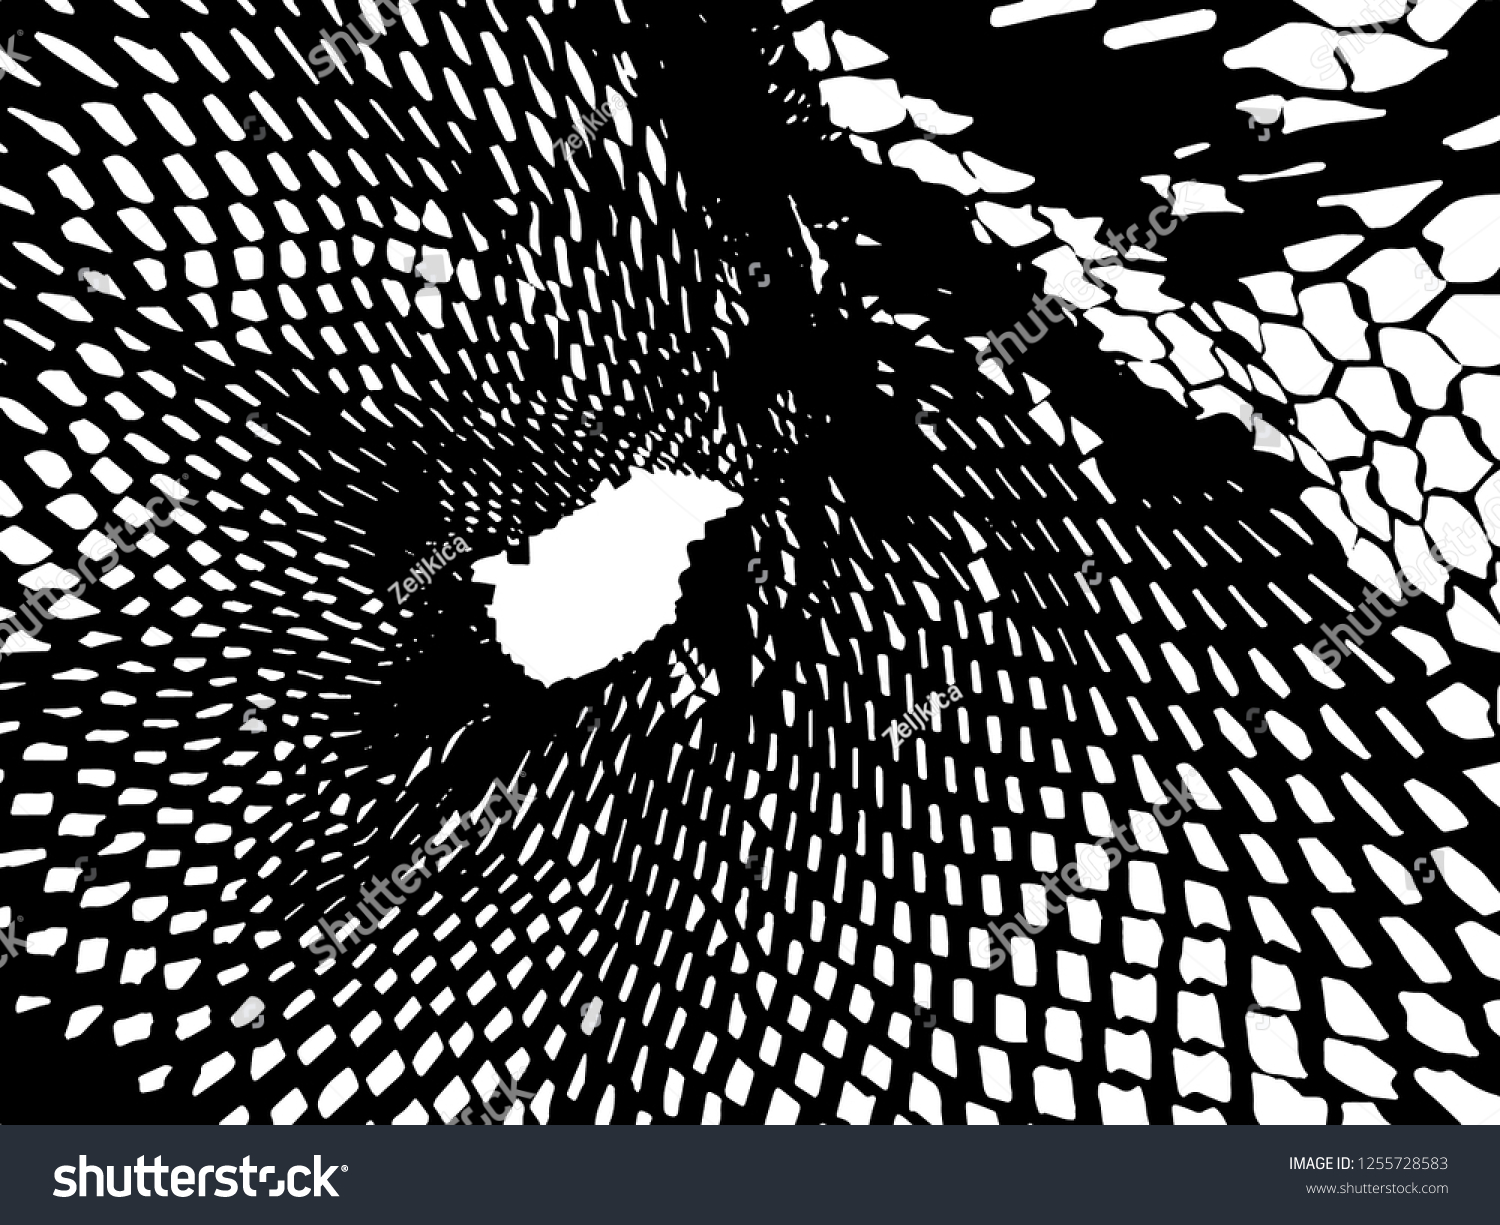 SVG of Black and white 3d vector image. Backdrop, pattern, distressed image. svg